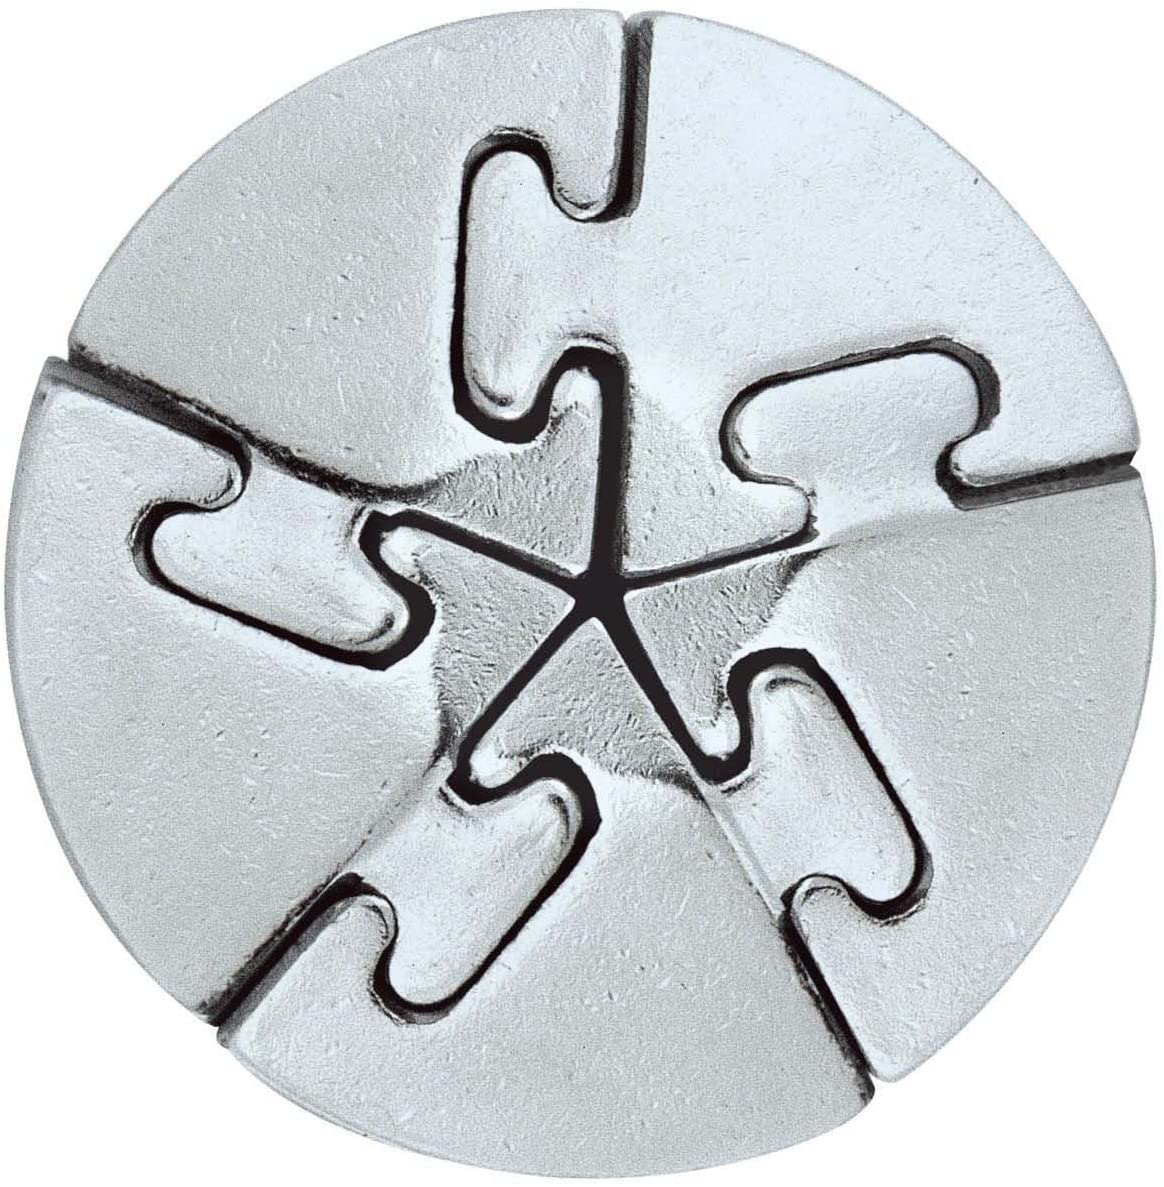 Bartl Huzzle Cast Puzzles, 50 Different High Quality Metal Puzzles for Experts Choose from a range of puzzles..., Spiral